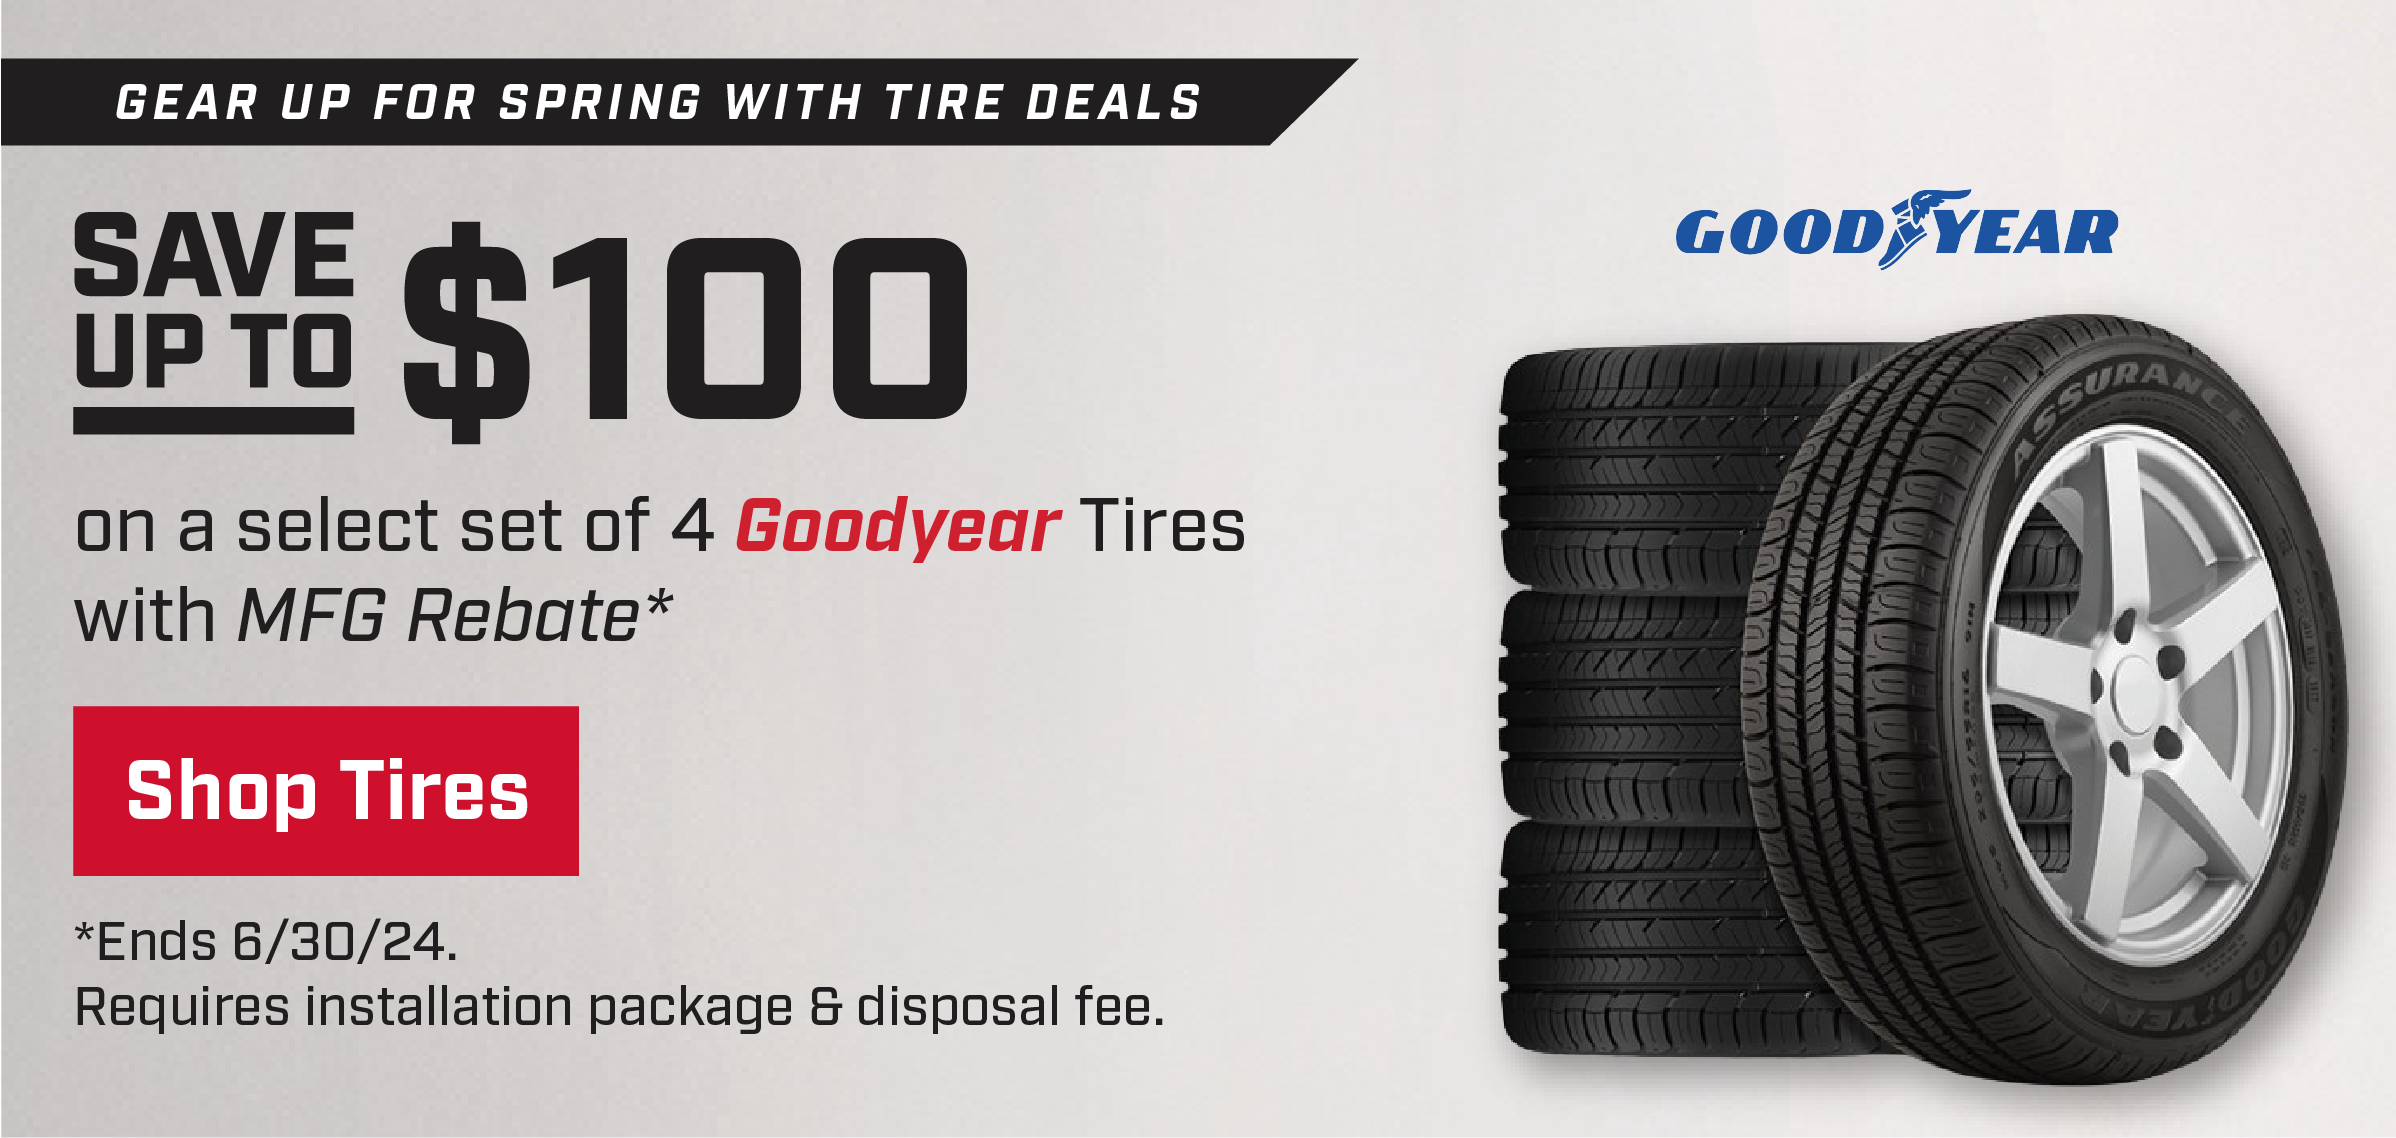 Save on Goodyear Tires